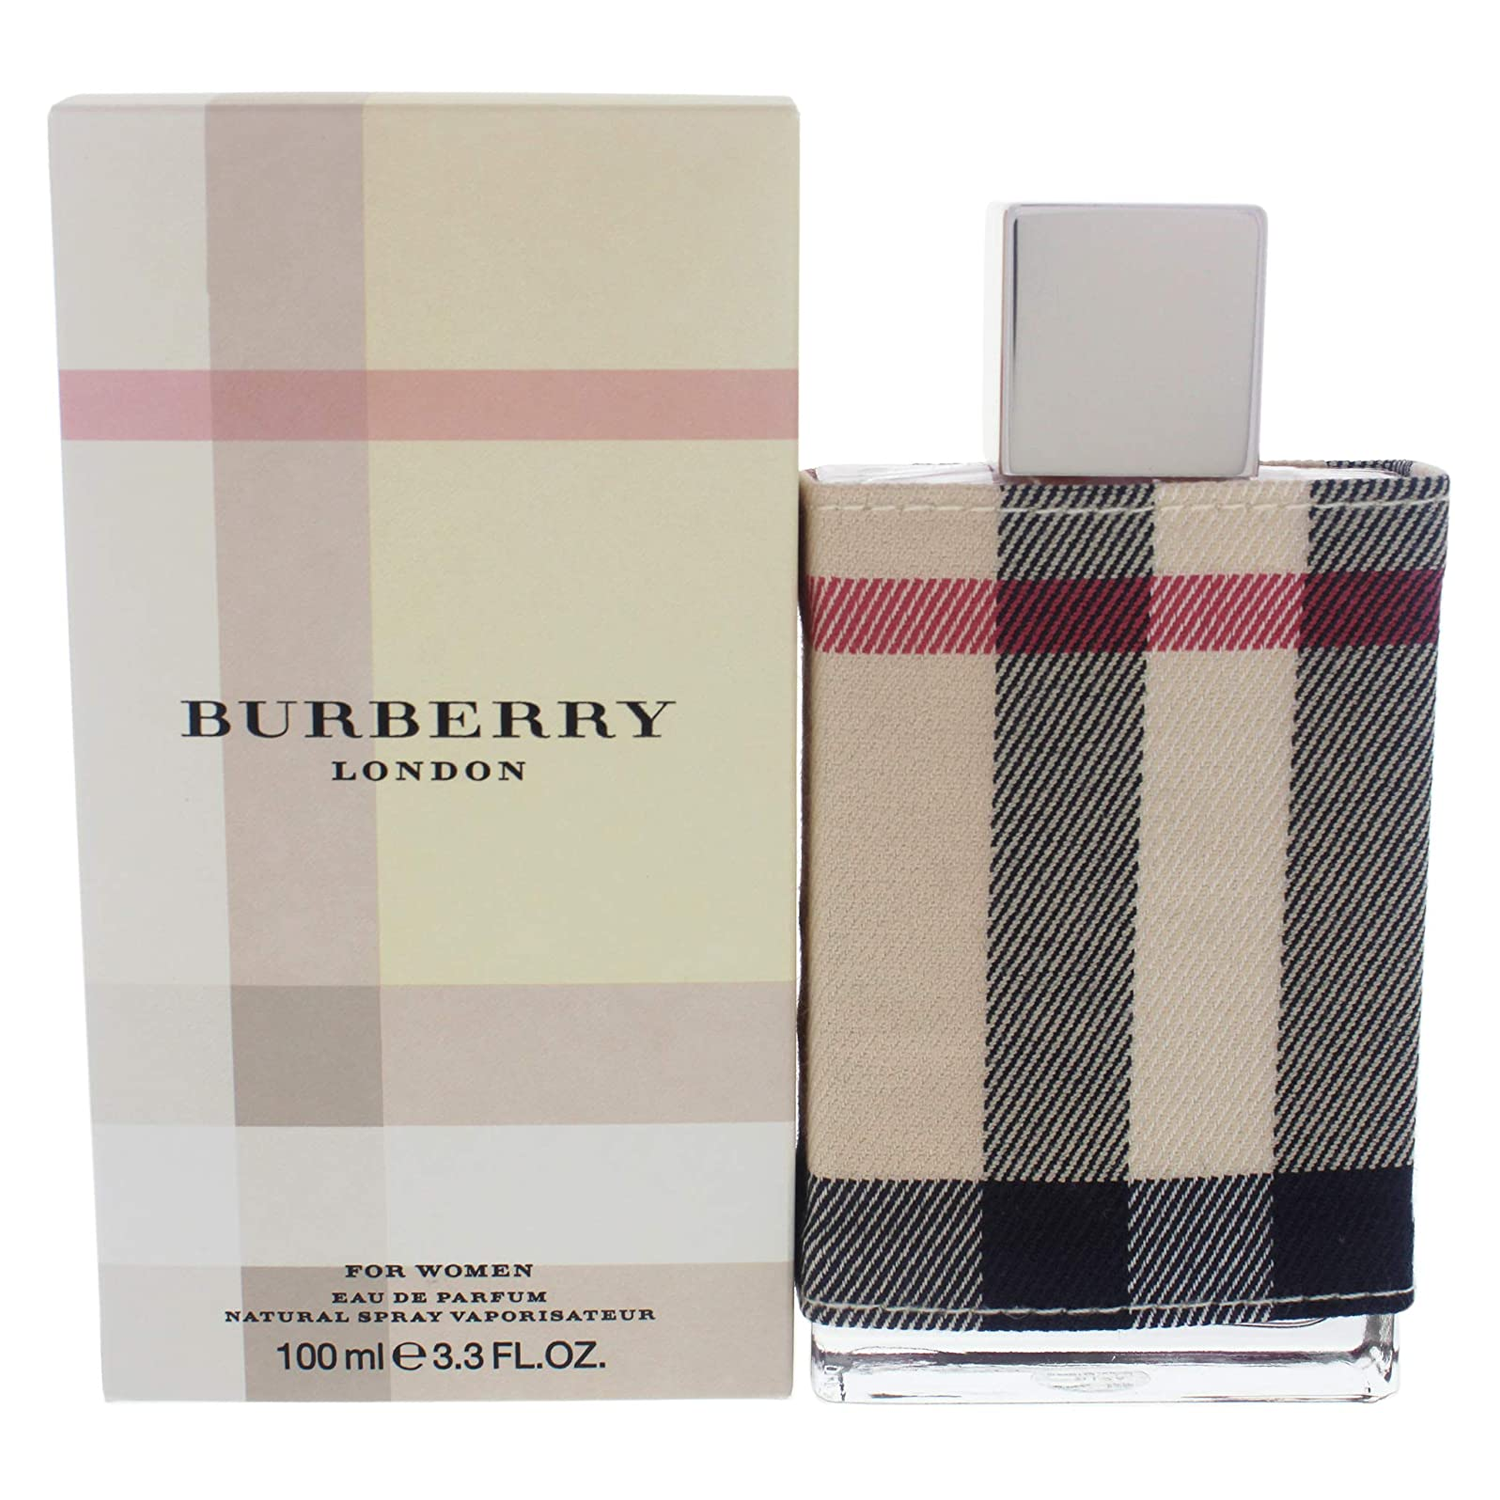 Burberry London for Women by Burberry in Canada – Perfumeonline.ca